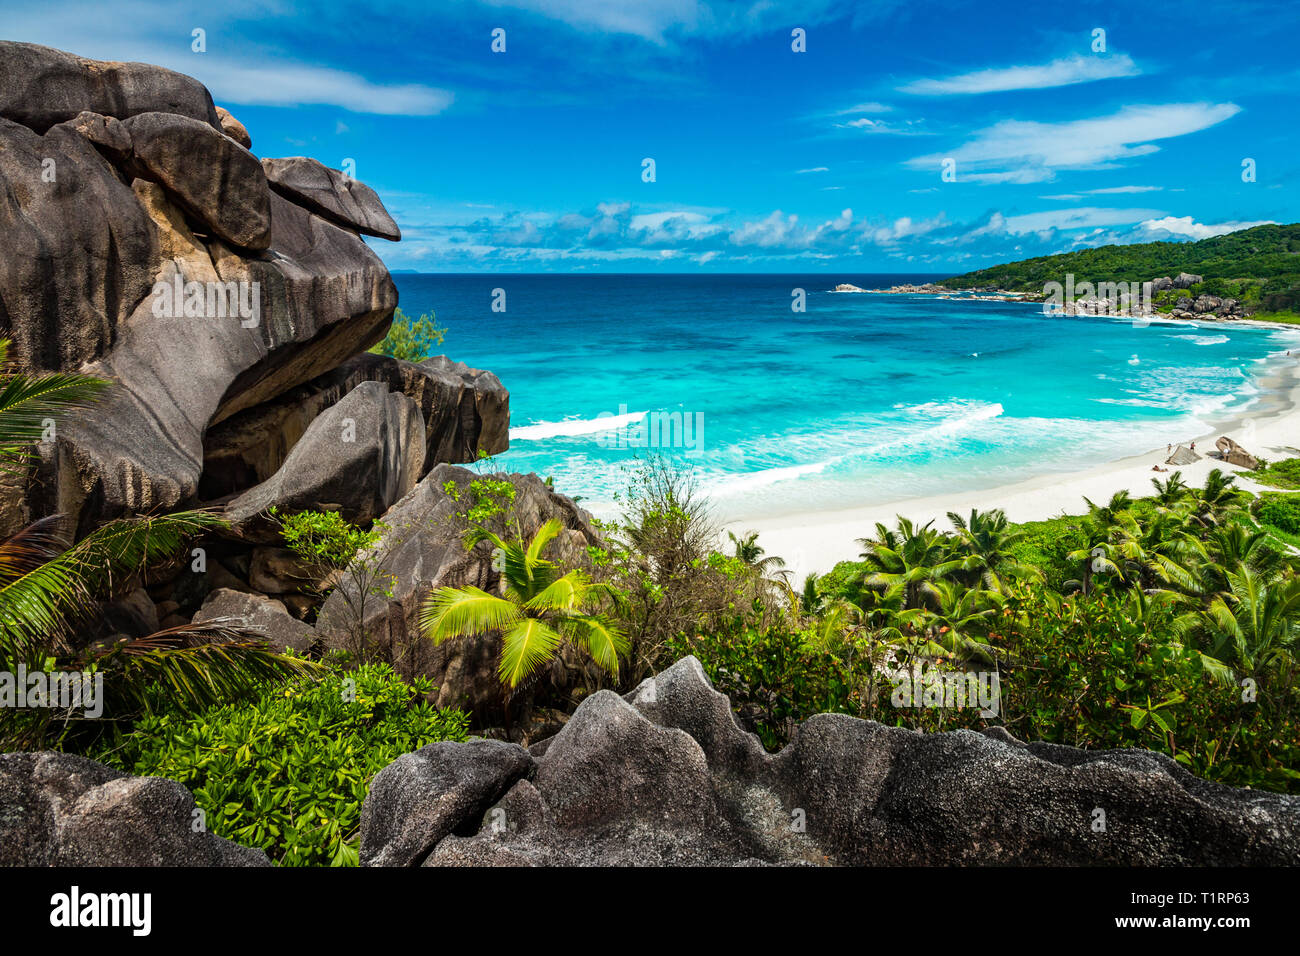 Amazing view at Grande Anse beach located on La Digue Island, Seychelles Stock Photo